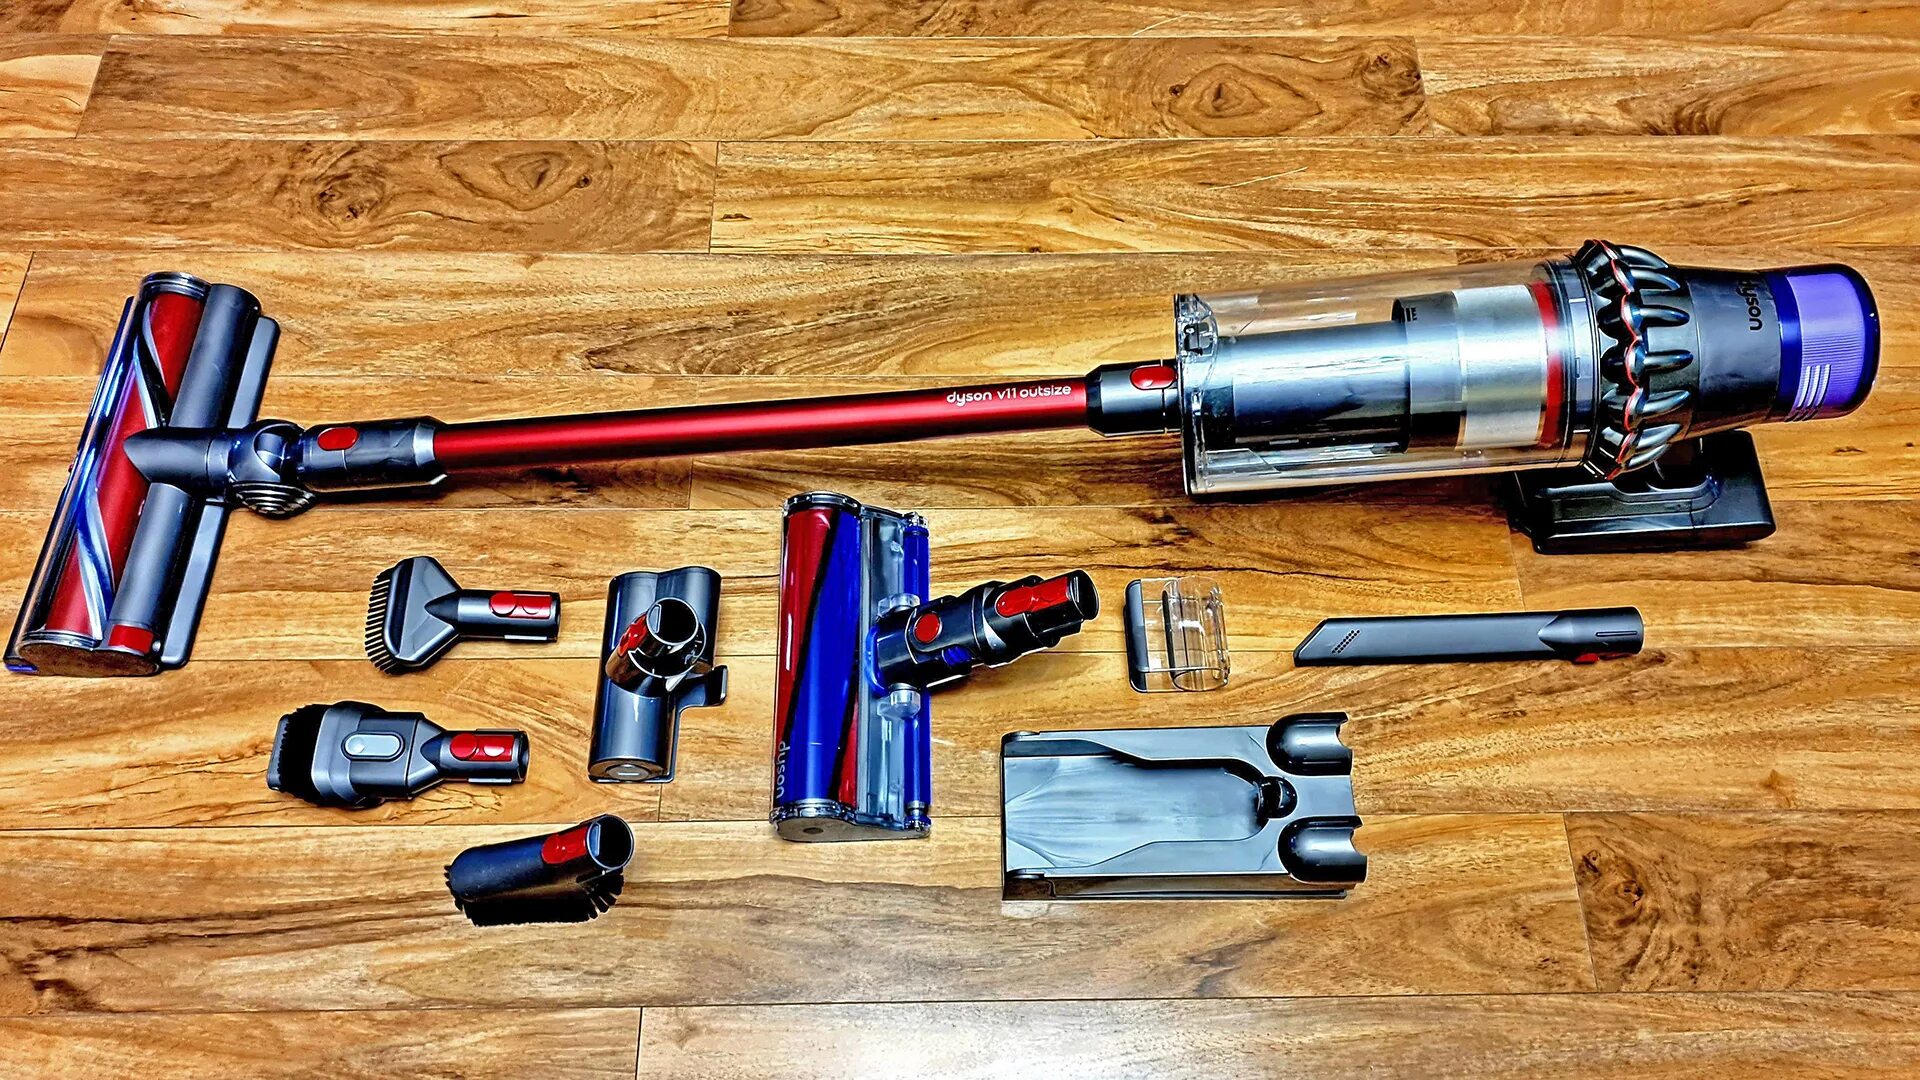 Dyson v11. Dyson v11 outsize. Dyson v12 ex. Dyson v11 outsize absolute.